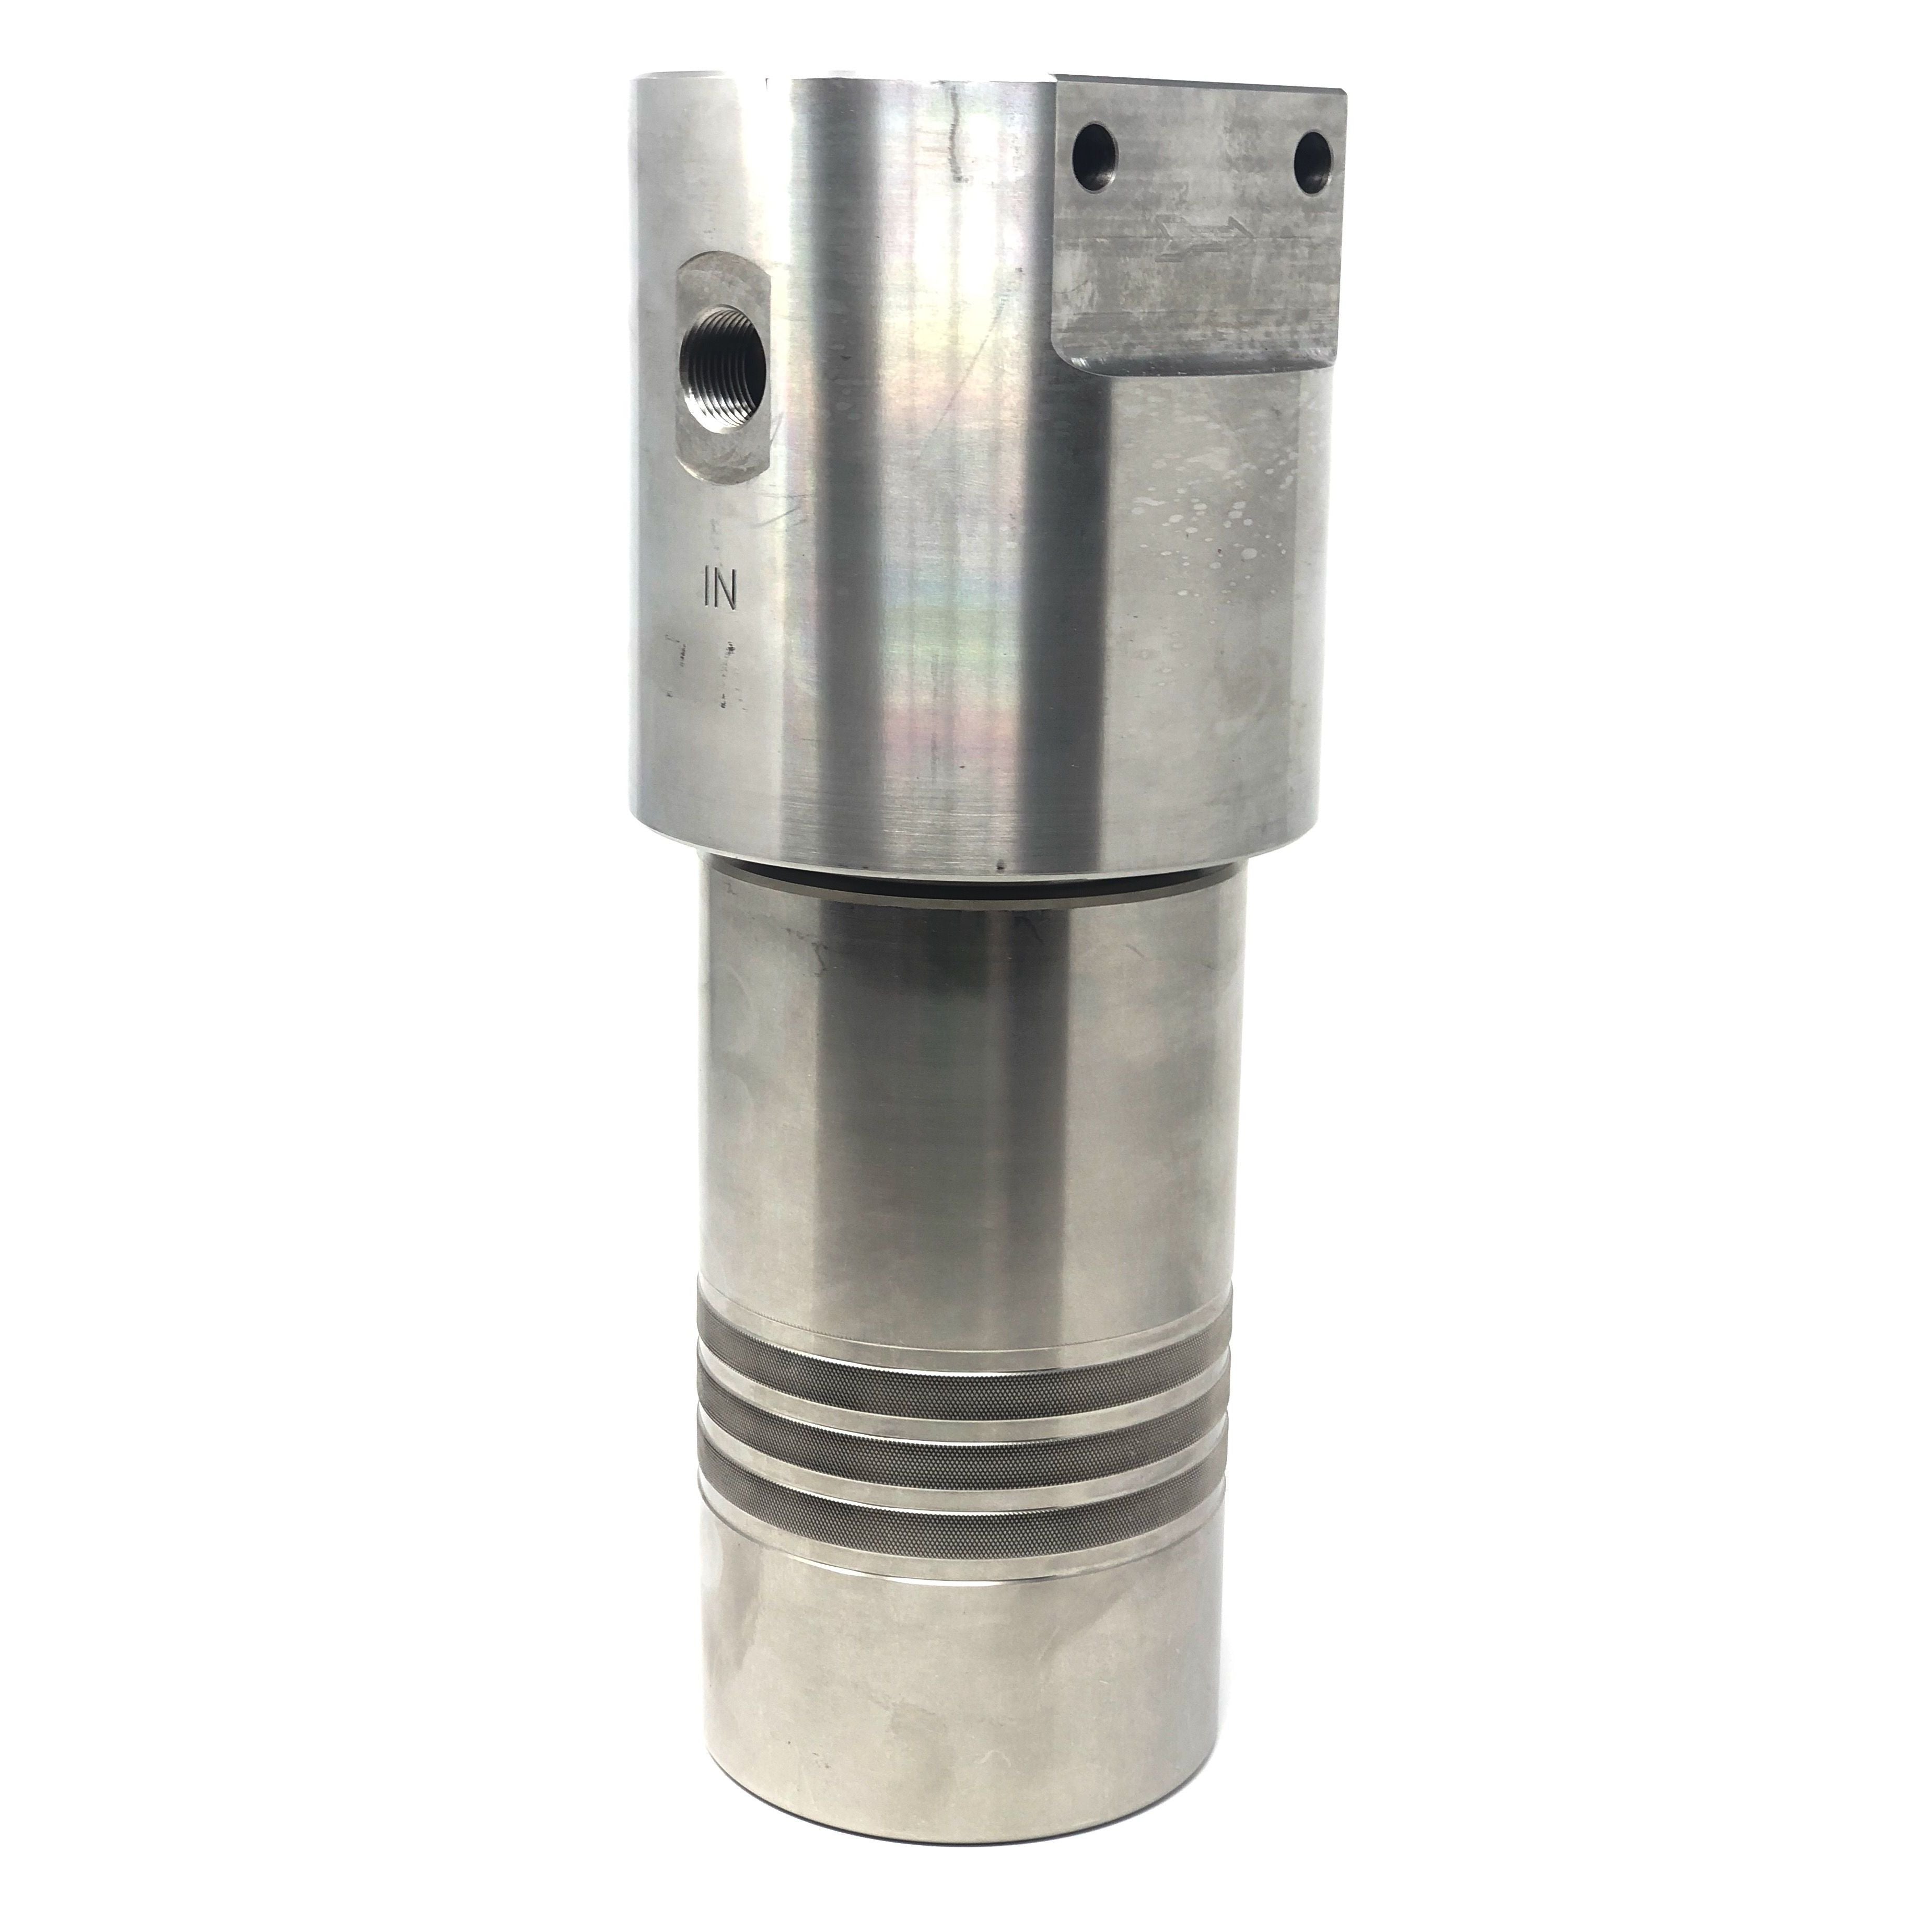 52S-2412N-12MDN : Chase Ultra High Pressure Inline Filter, 10000psi, 3/4" NPT, 12 Micron, With Visual Indicator, No Bypass